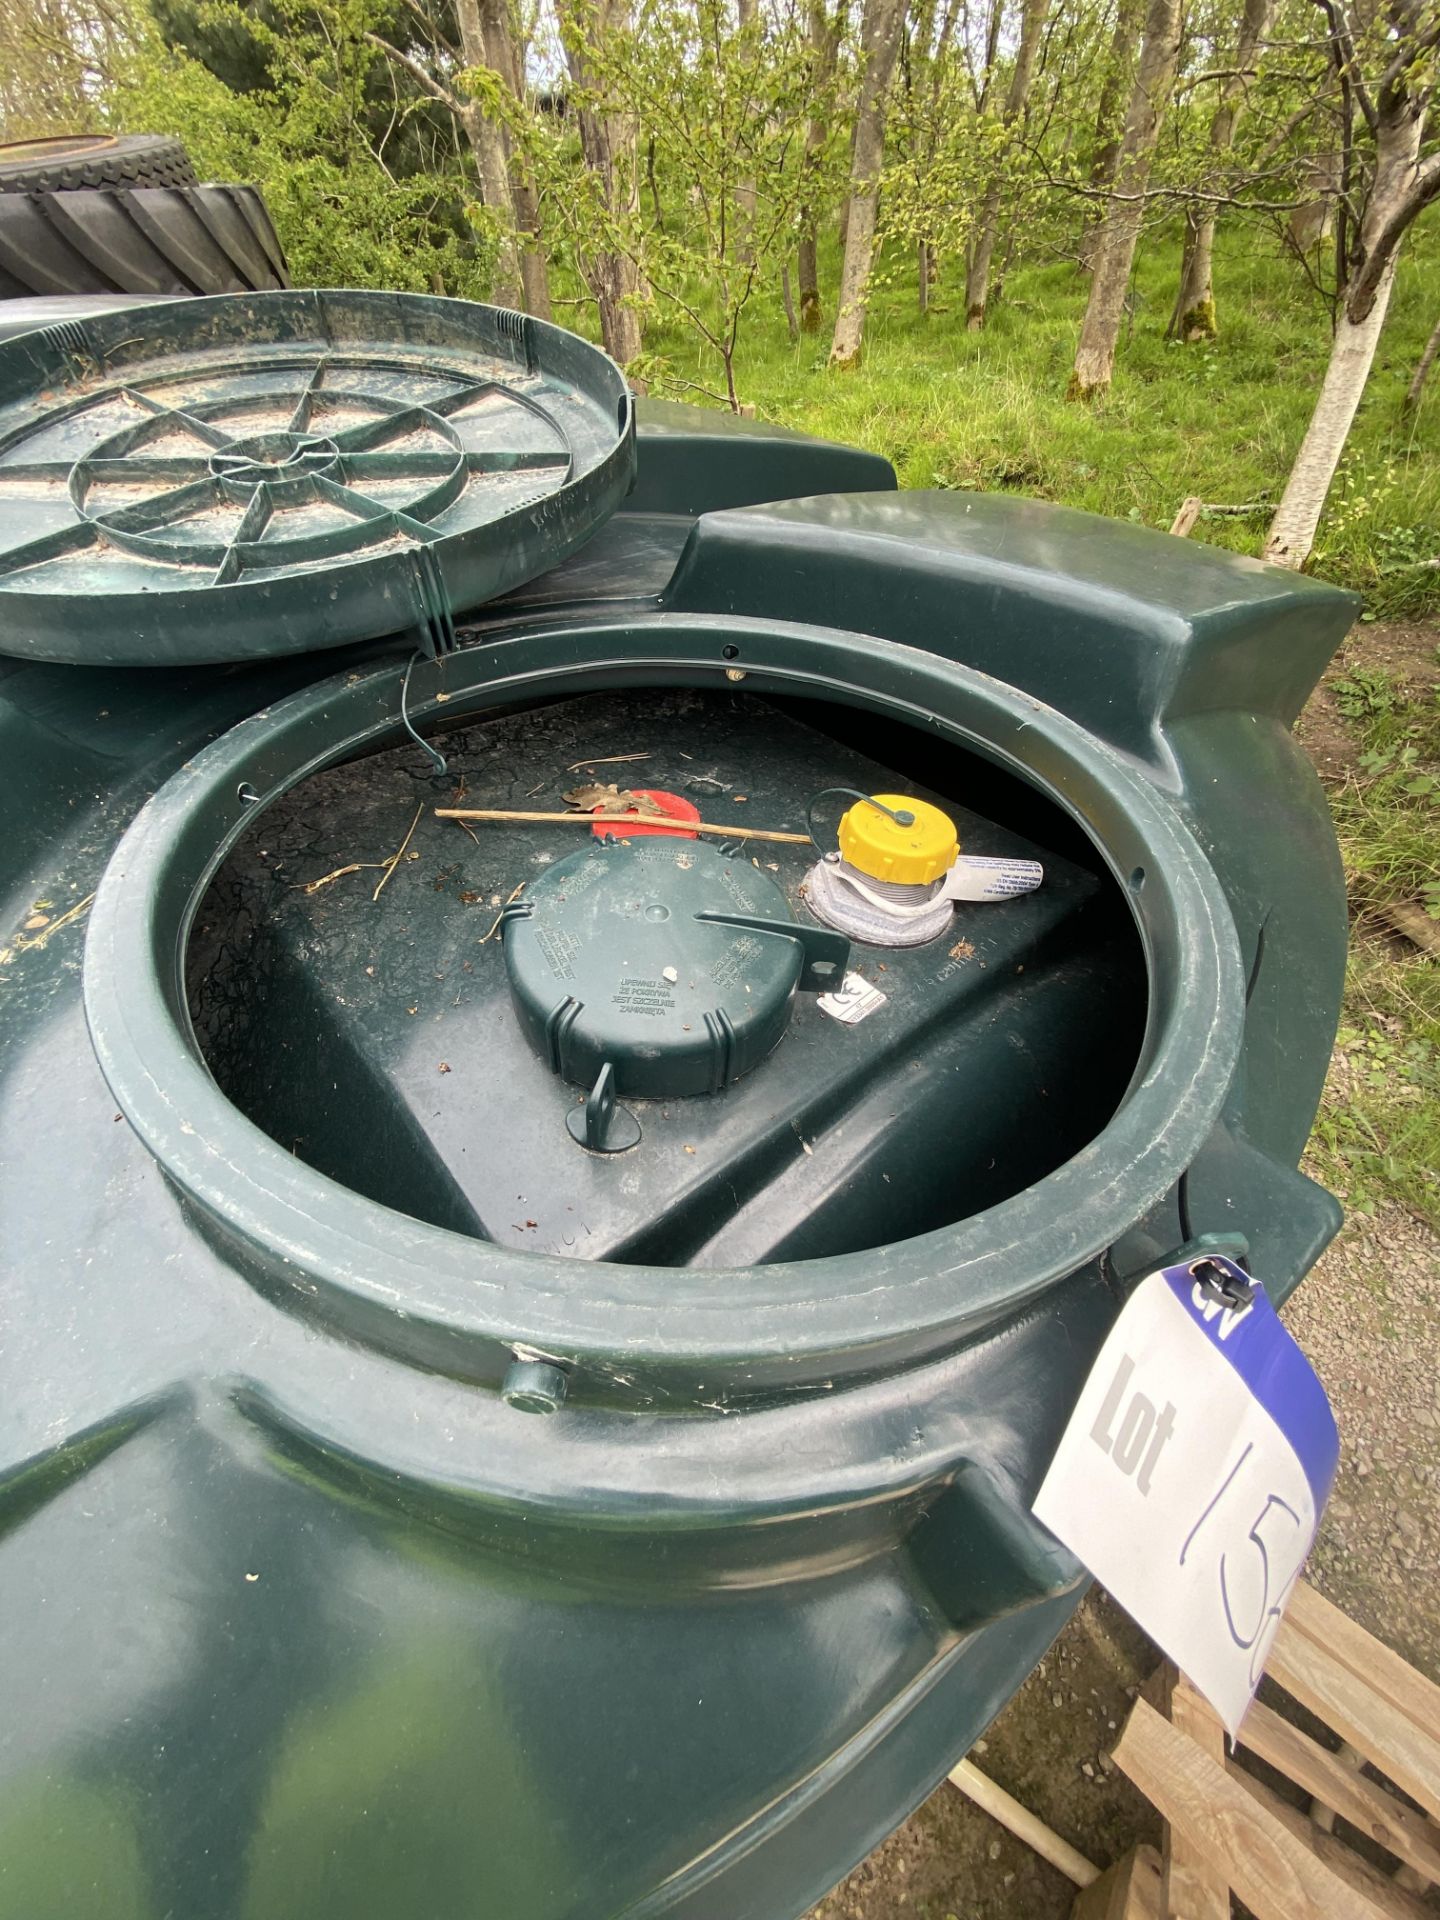 Titan Kingspan Ecosafe 2500 litre cap. Bunded Oil Tank, 2450mm x 1425mm x 1450mm, lot located in - Image 3 of 3